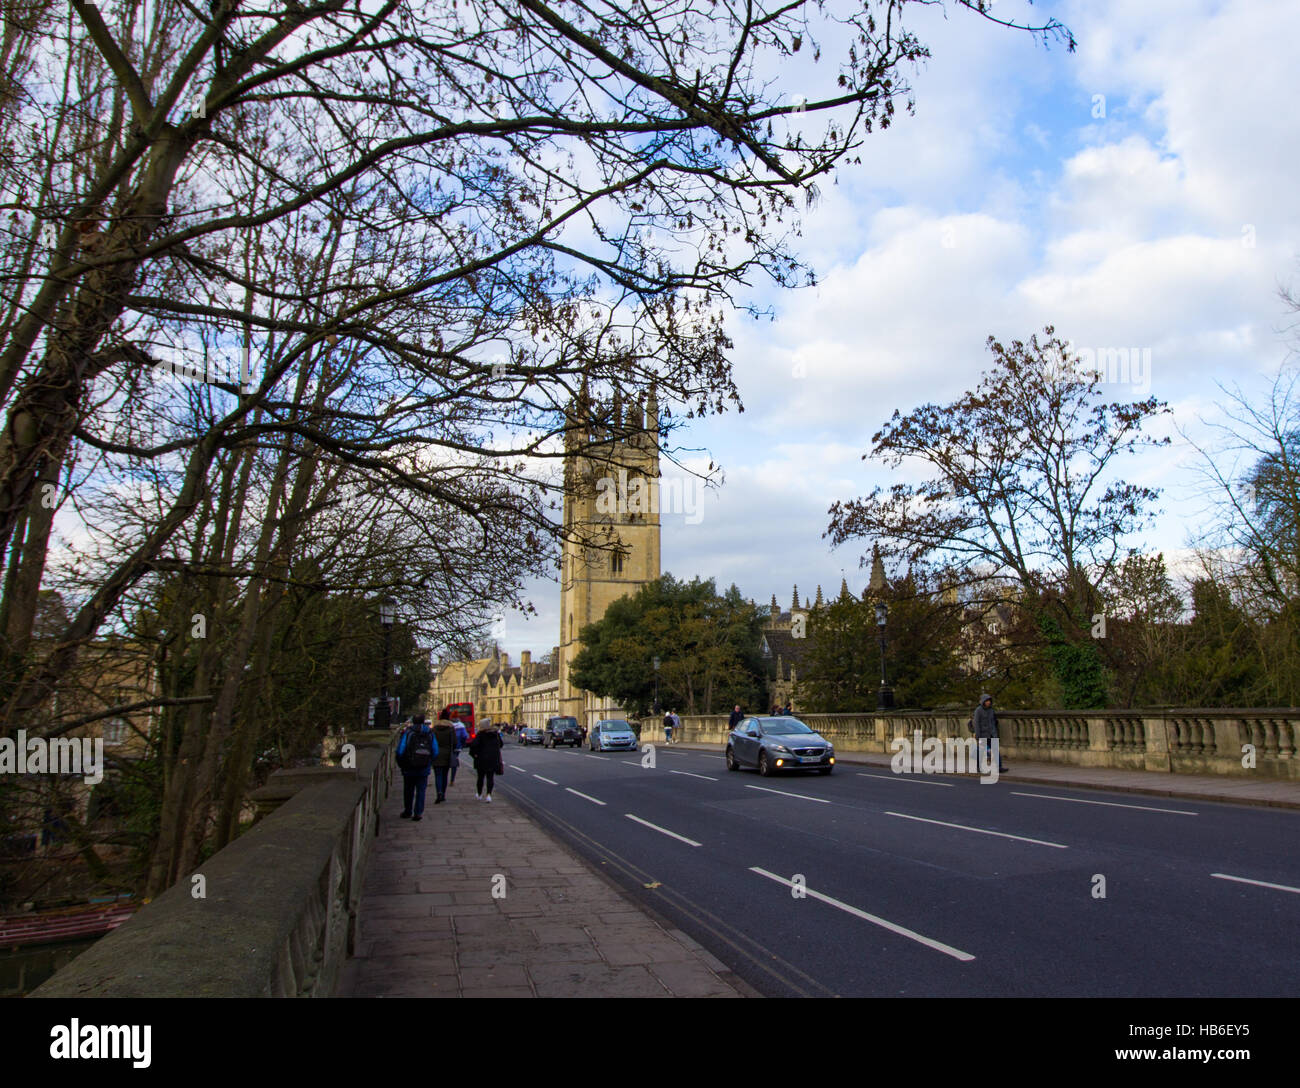 View on Oxford High Street towards Magdalen Tower, part of the famous Oxford University. Stock Photo